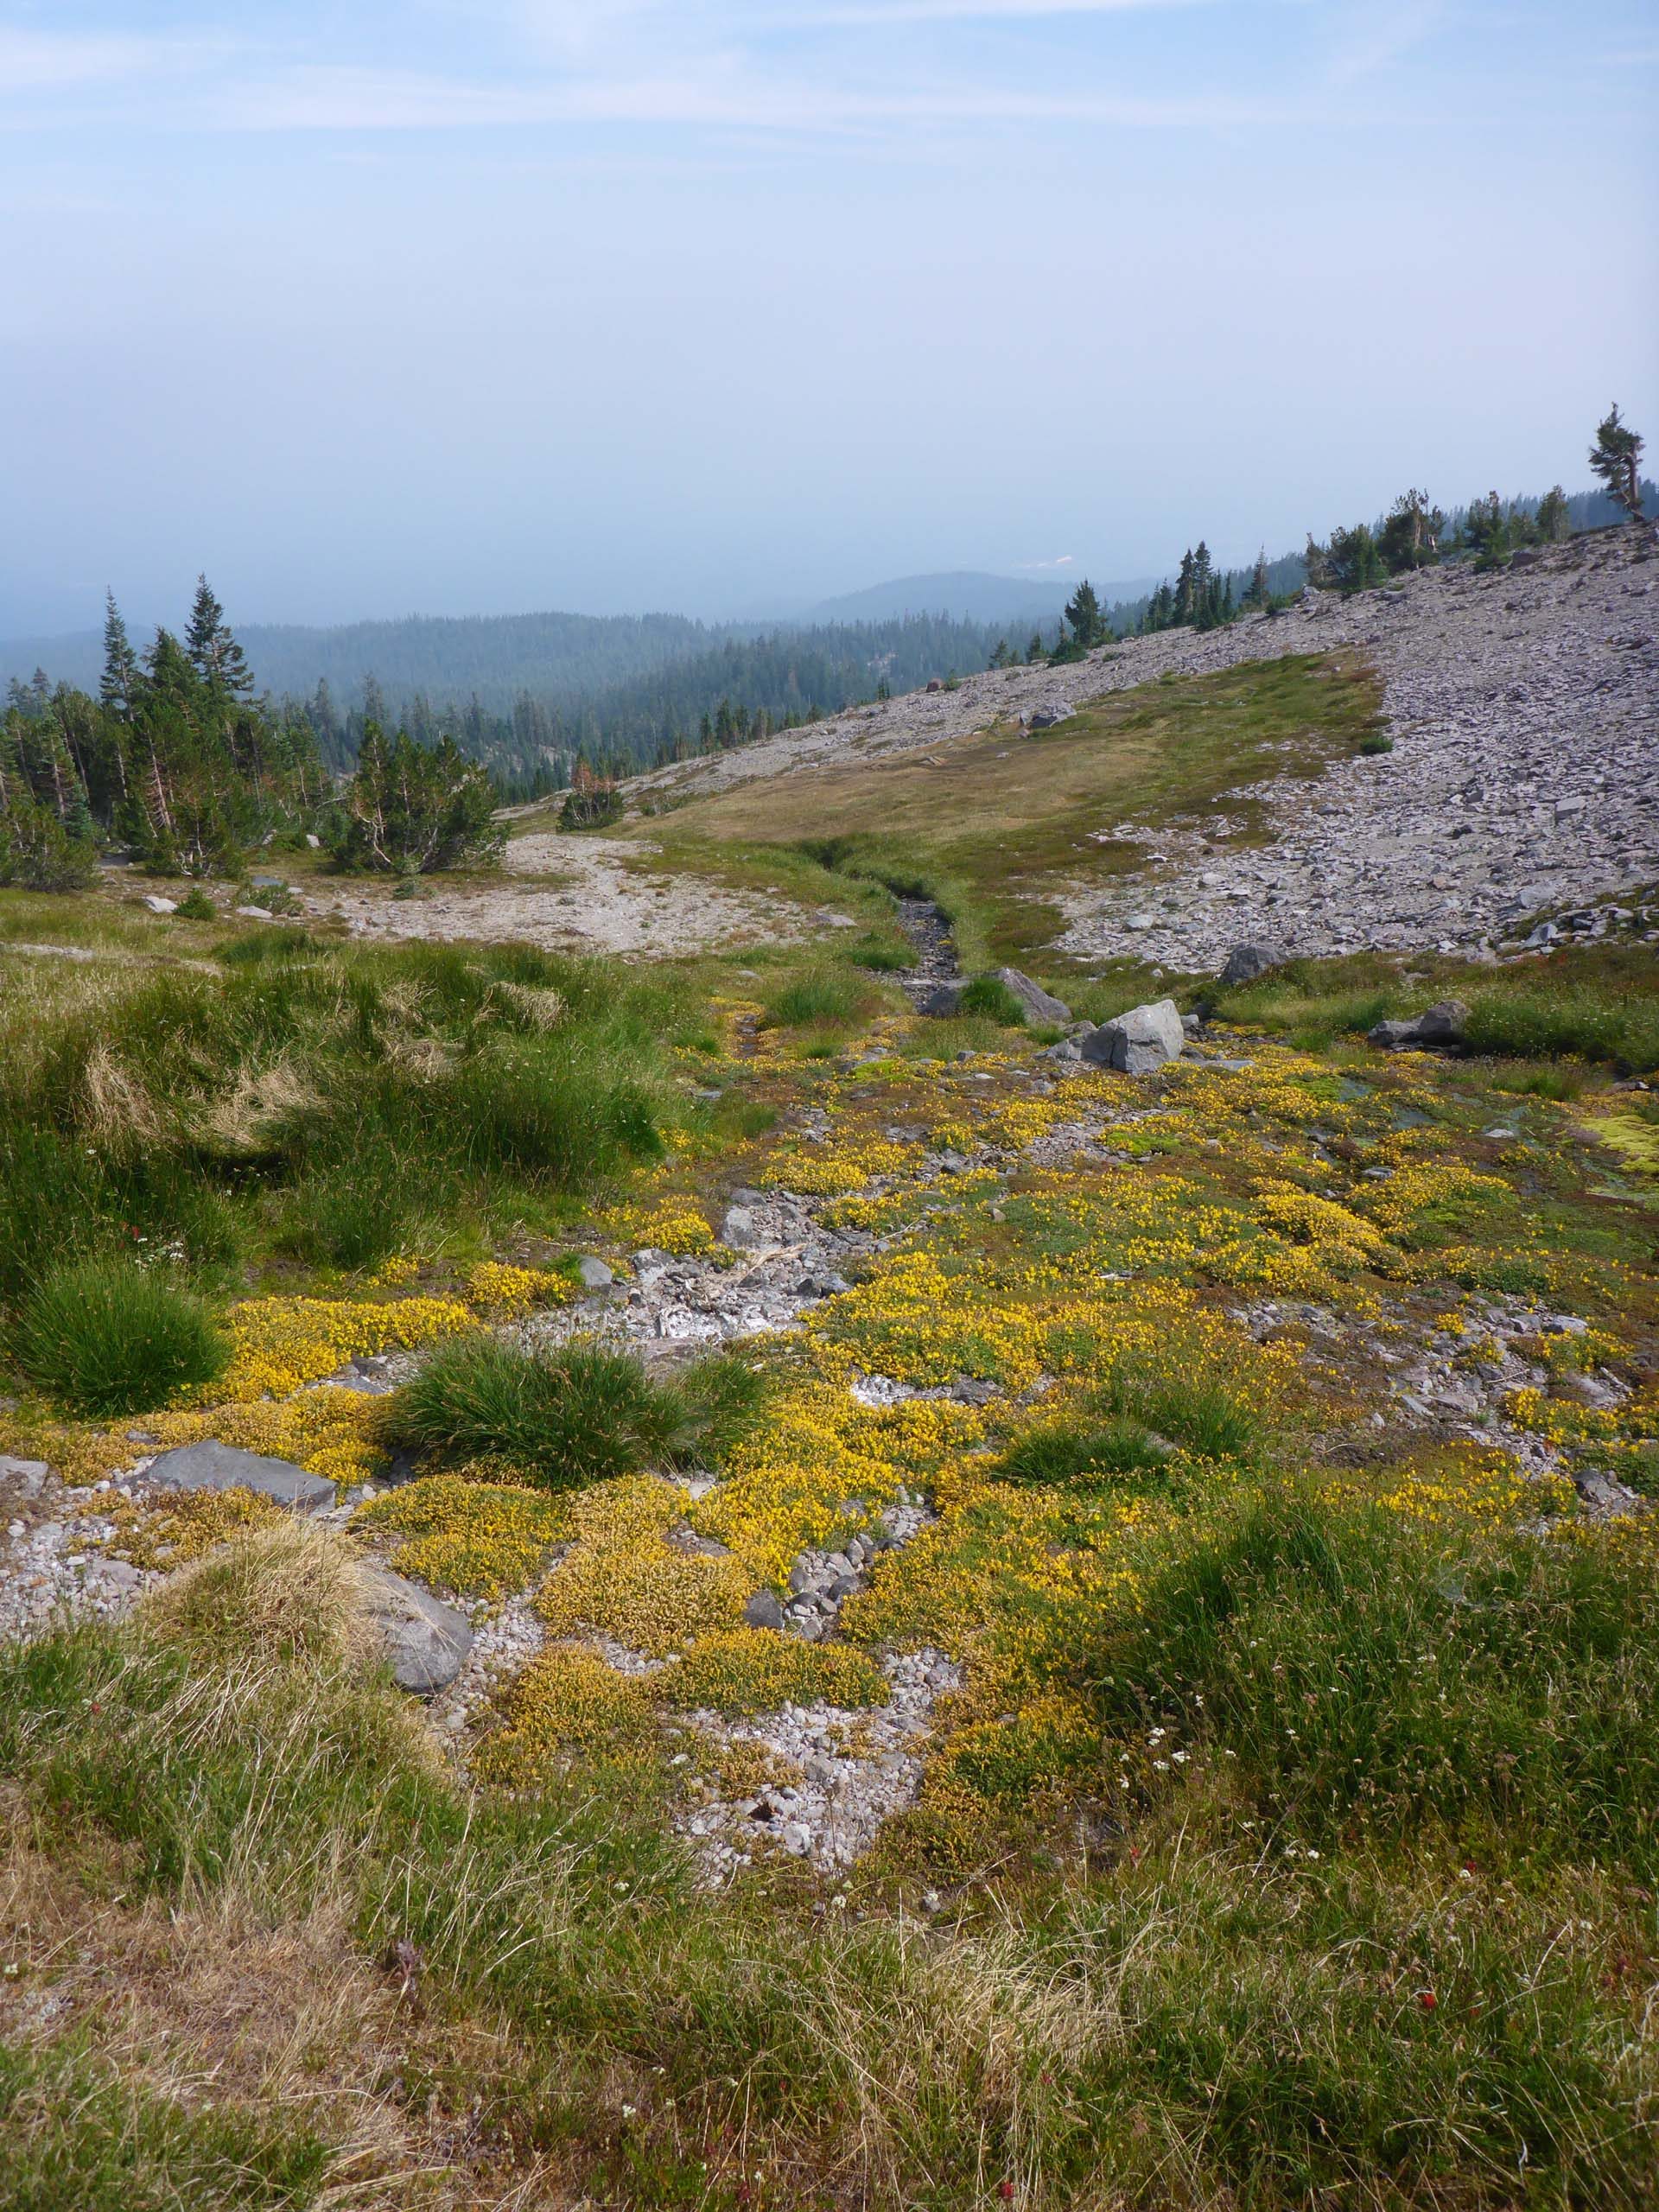 Tiling's monkeyflower at the headwaters of the stream to South Gae Meadows. D. Burk.